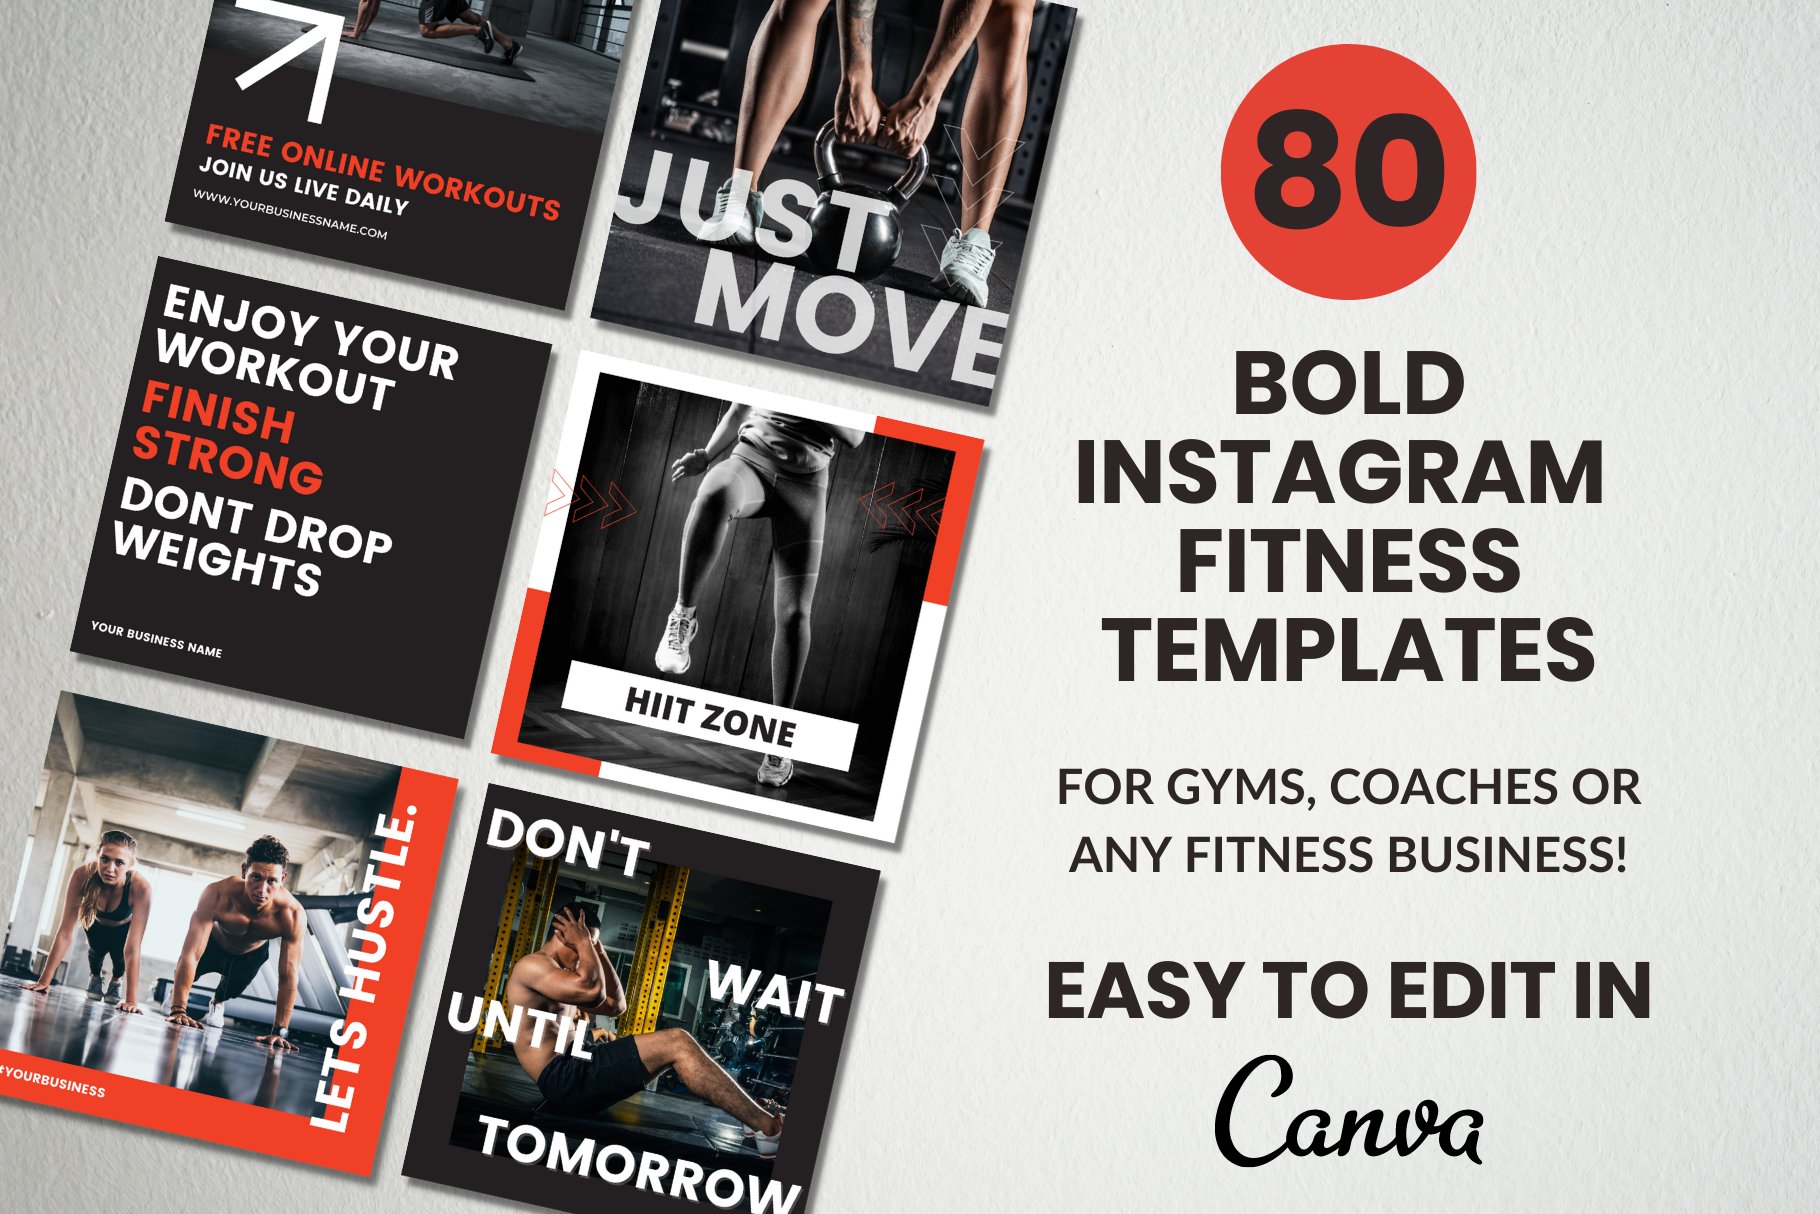 Fitness Canva Instagram Template cover image.